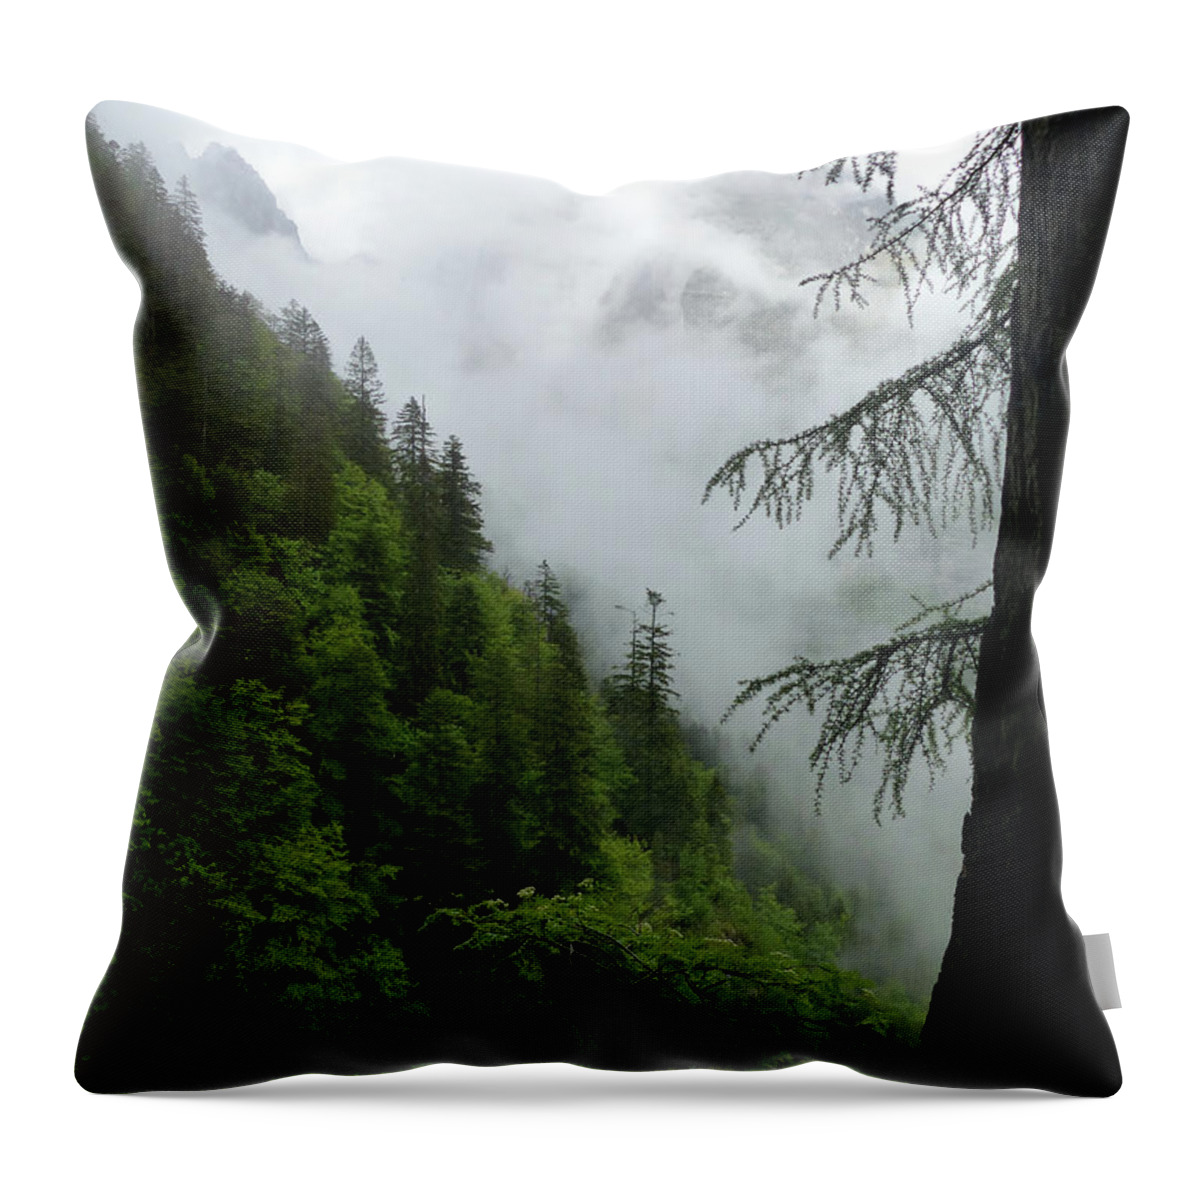 Mountains Throw Pillow featuring the photograph Mountain Mist Clearing by Phil Banks